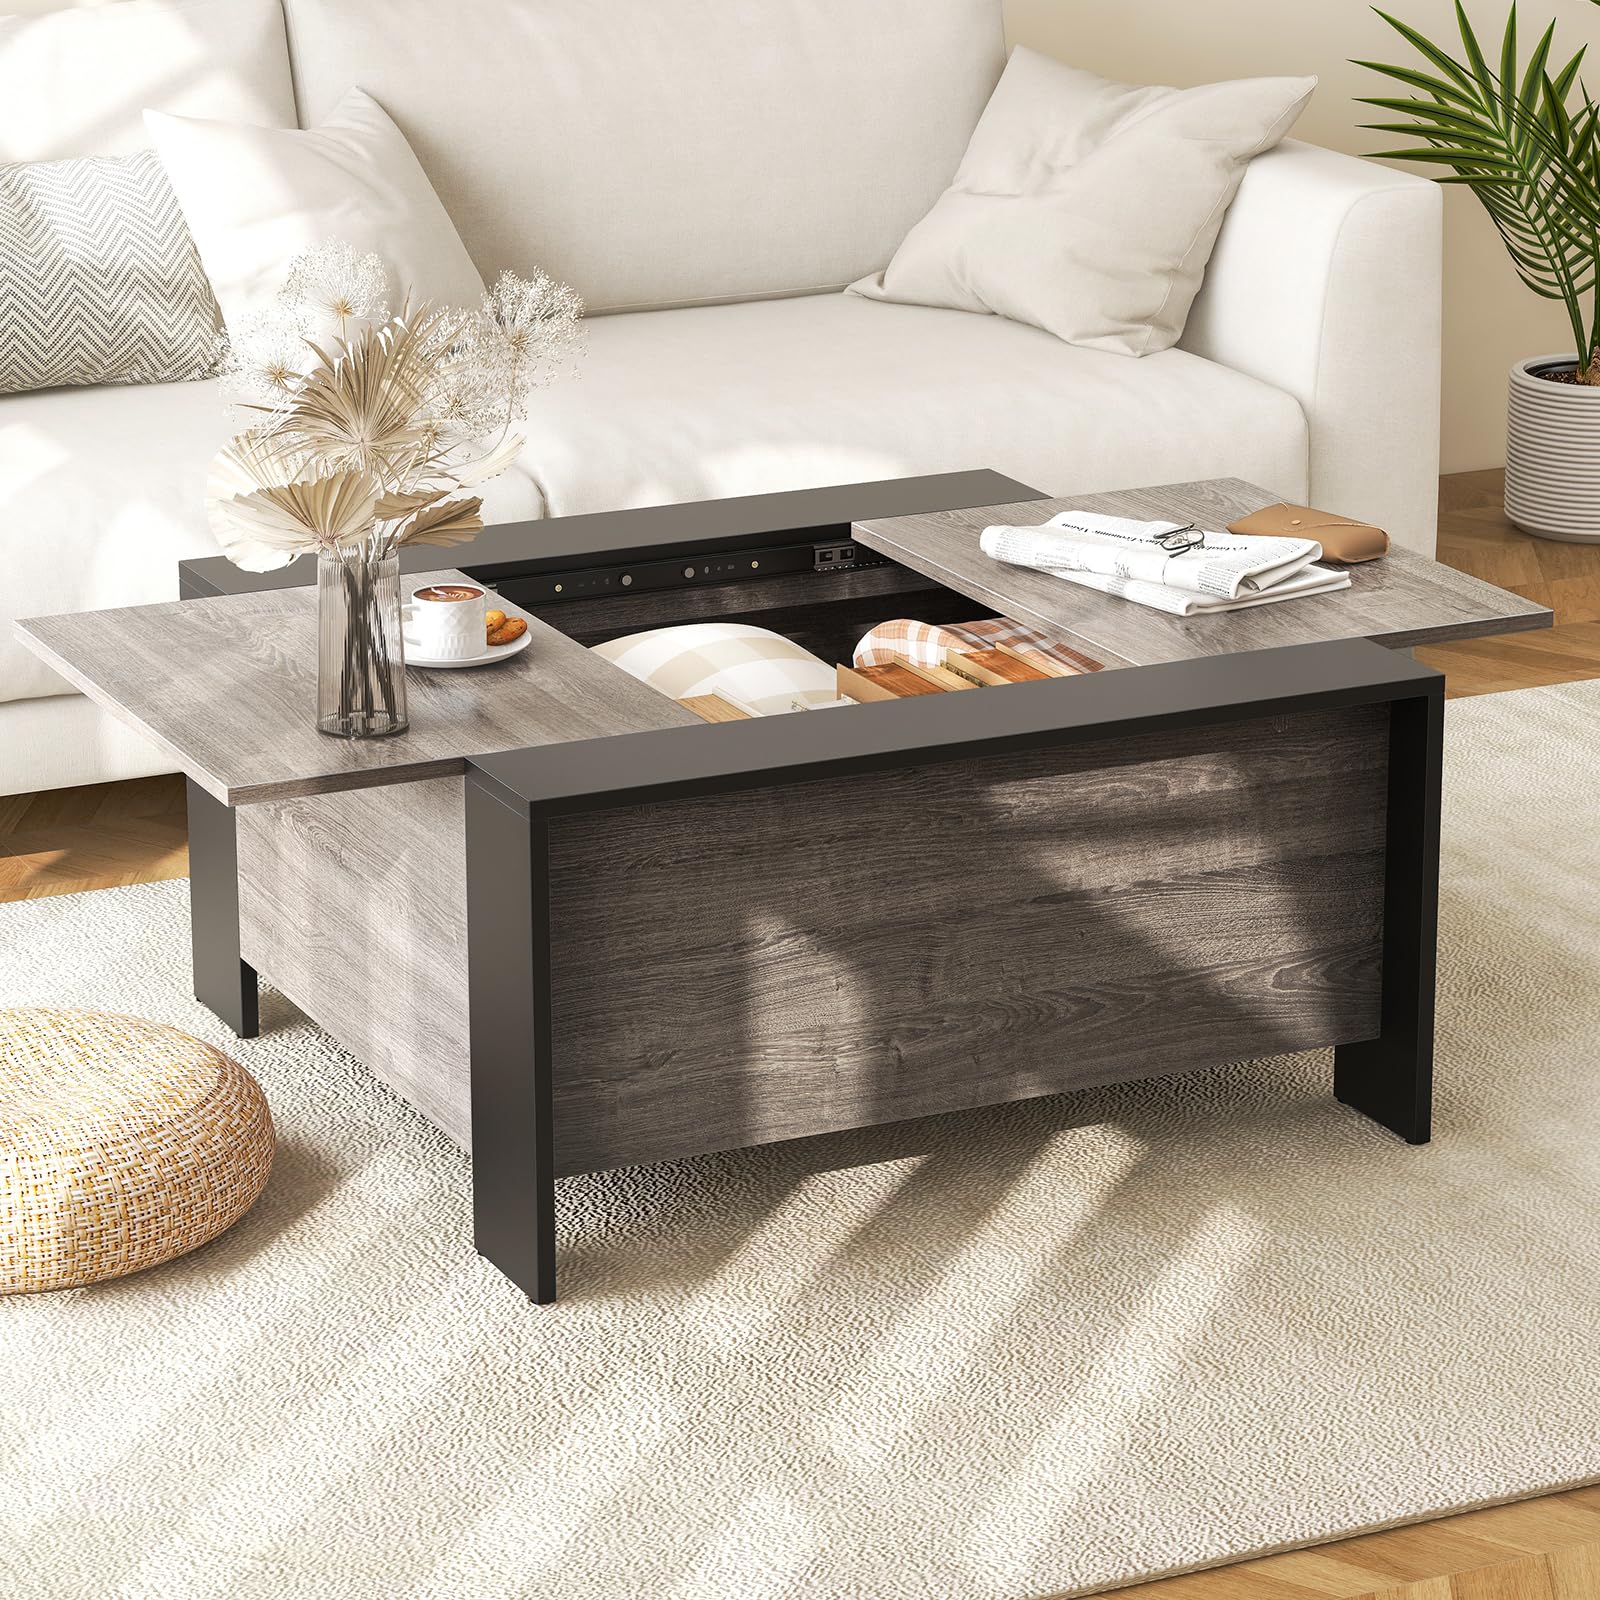  Square Farmhouse Coffee Table with Hidden Storage - Tangkula